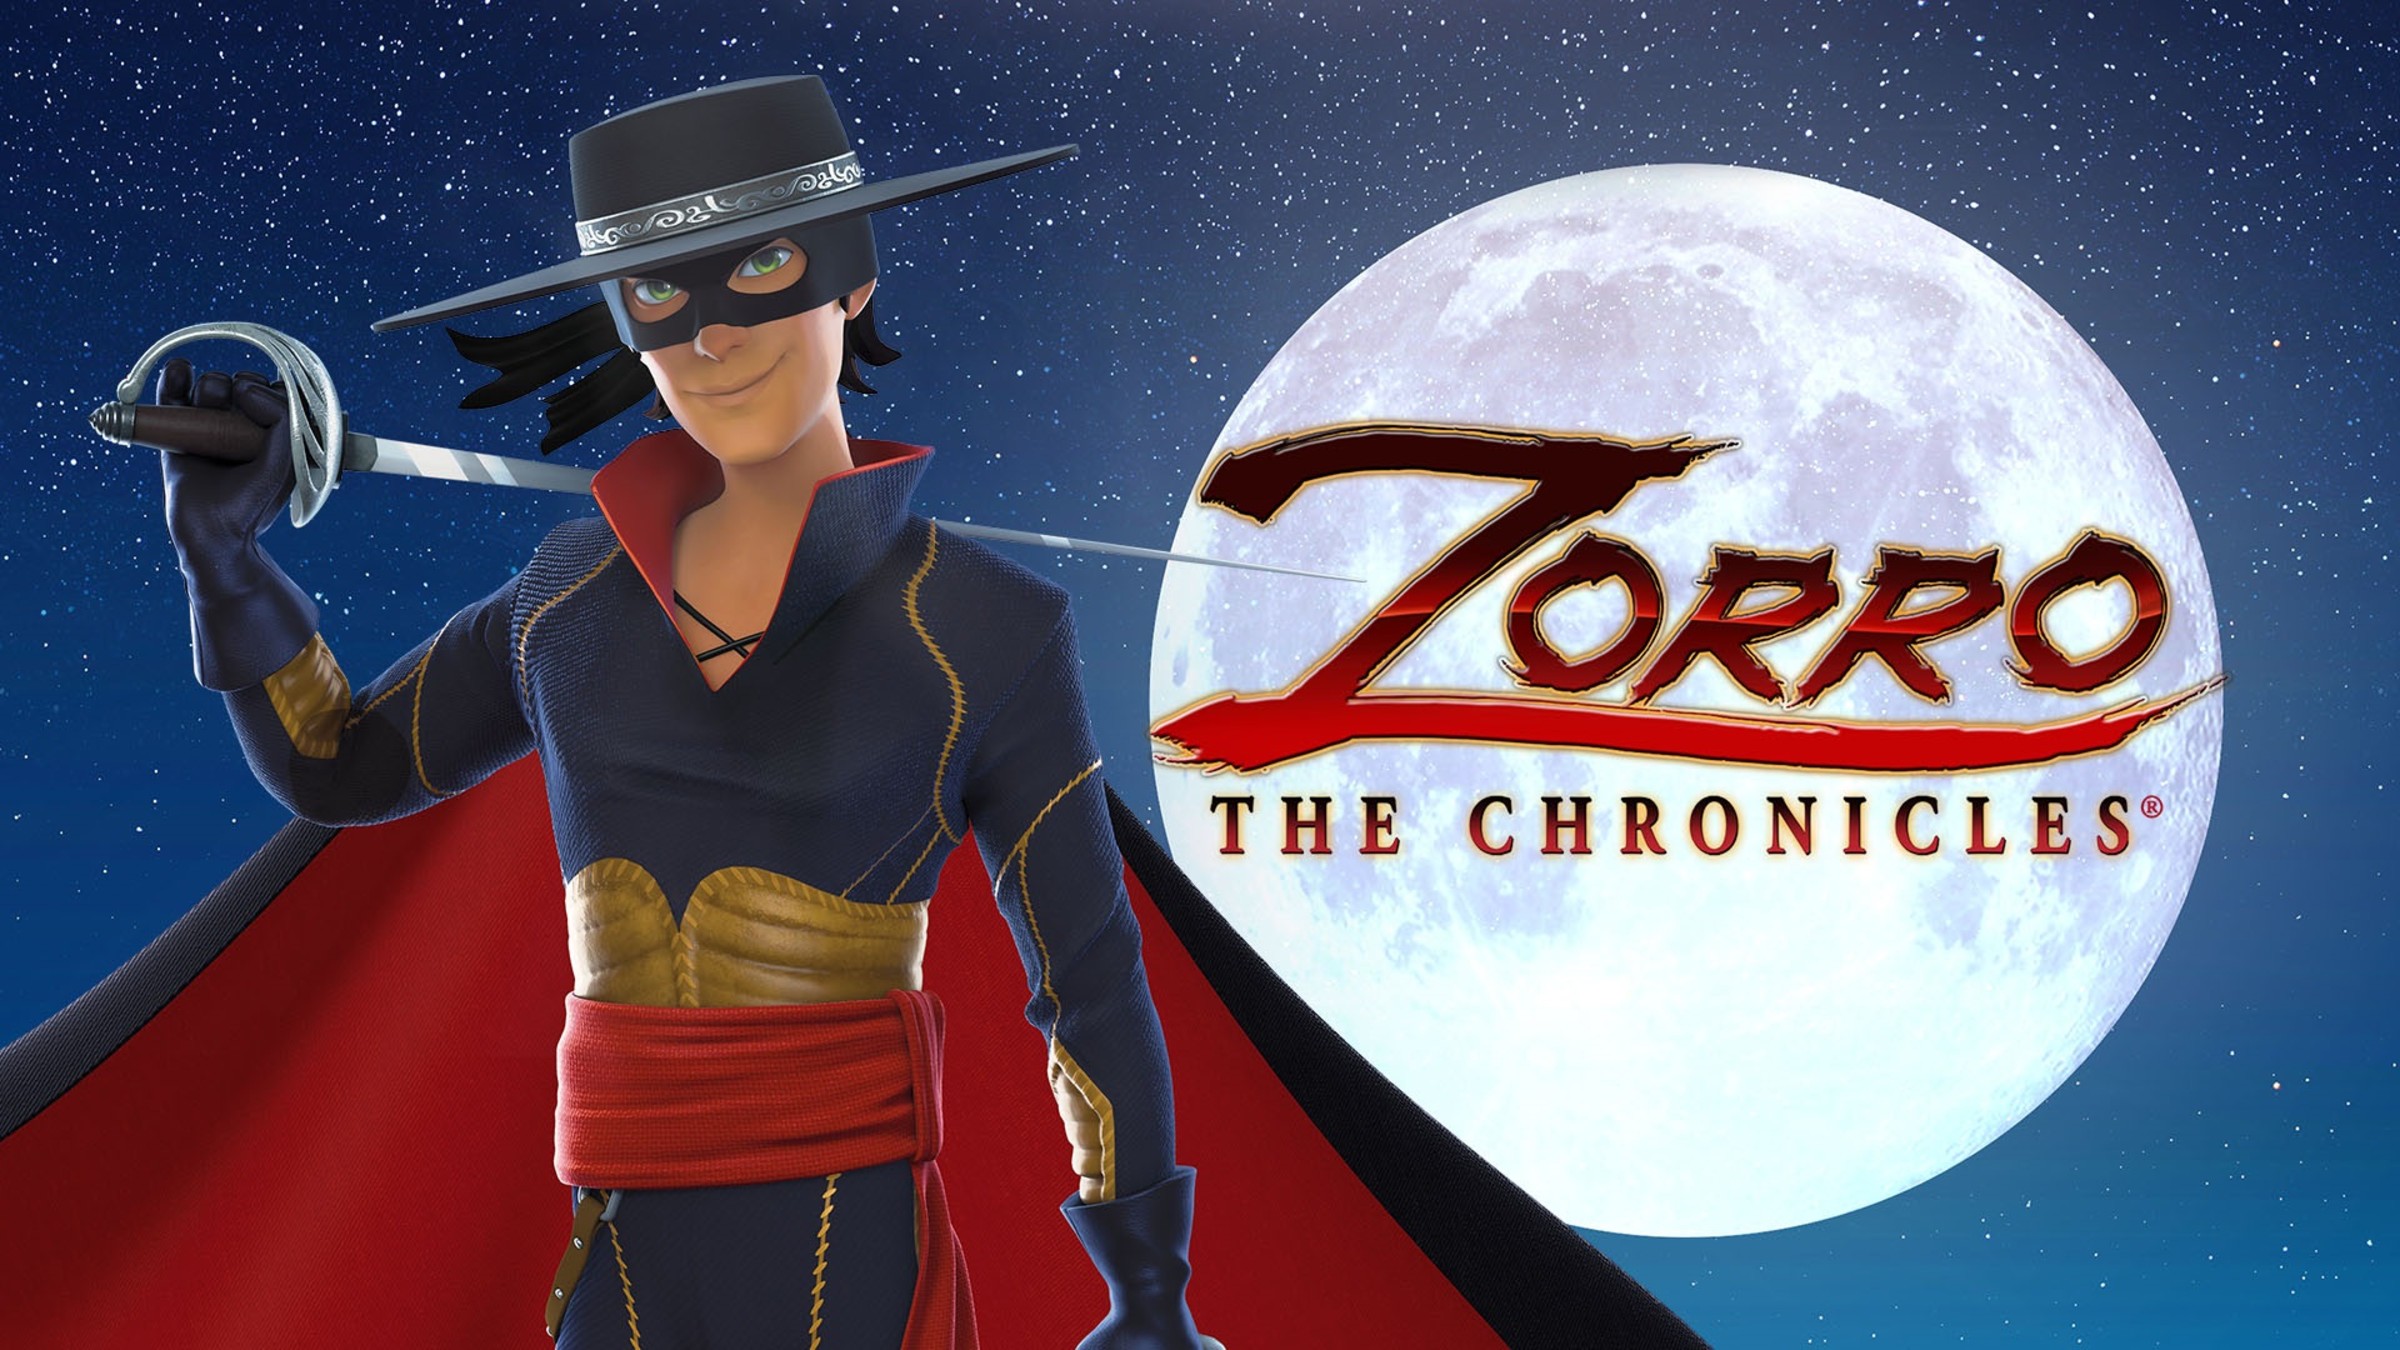 Zorro The Chronicles for Nintendo Switch - Nintendo Official Site